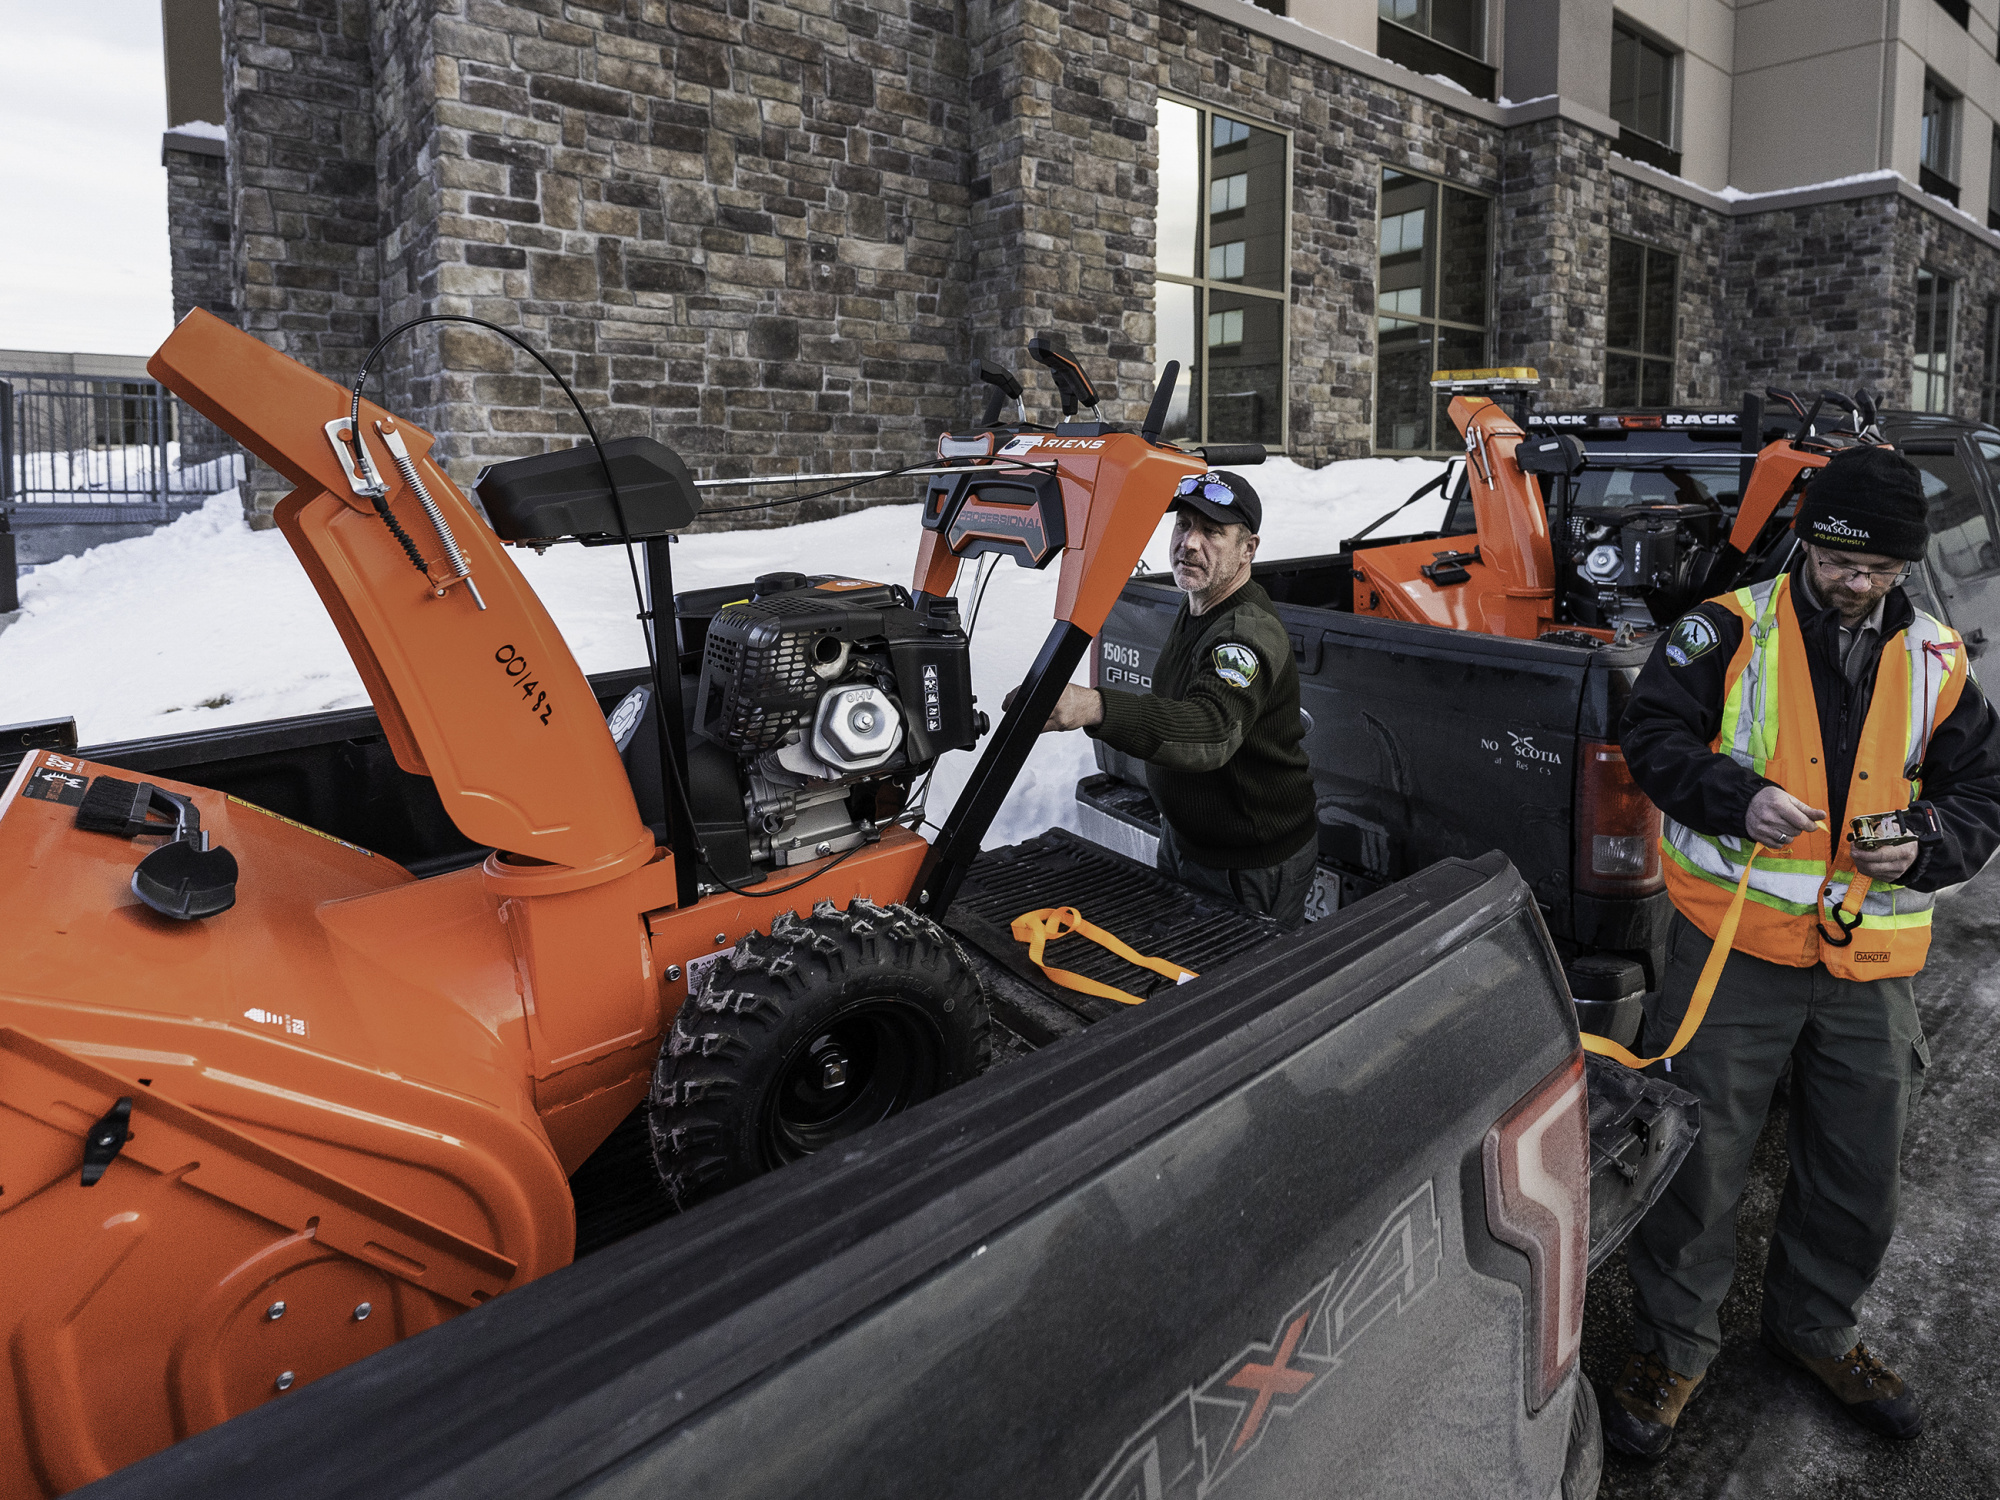 Department of Natural Resources and Renewables staff load snowblowers into the back of pickup trucks.